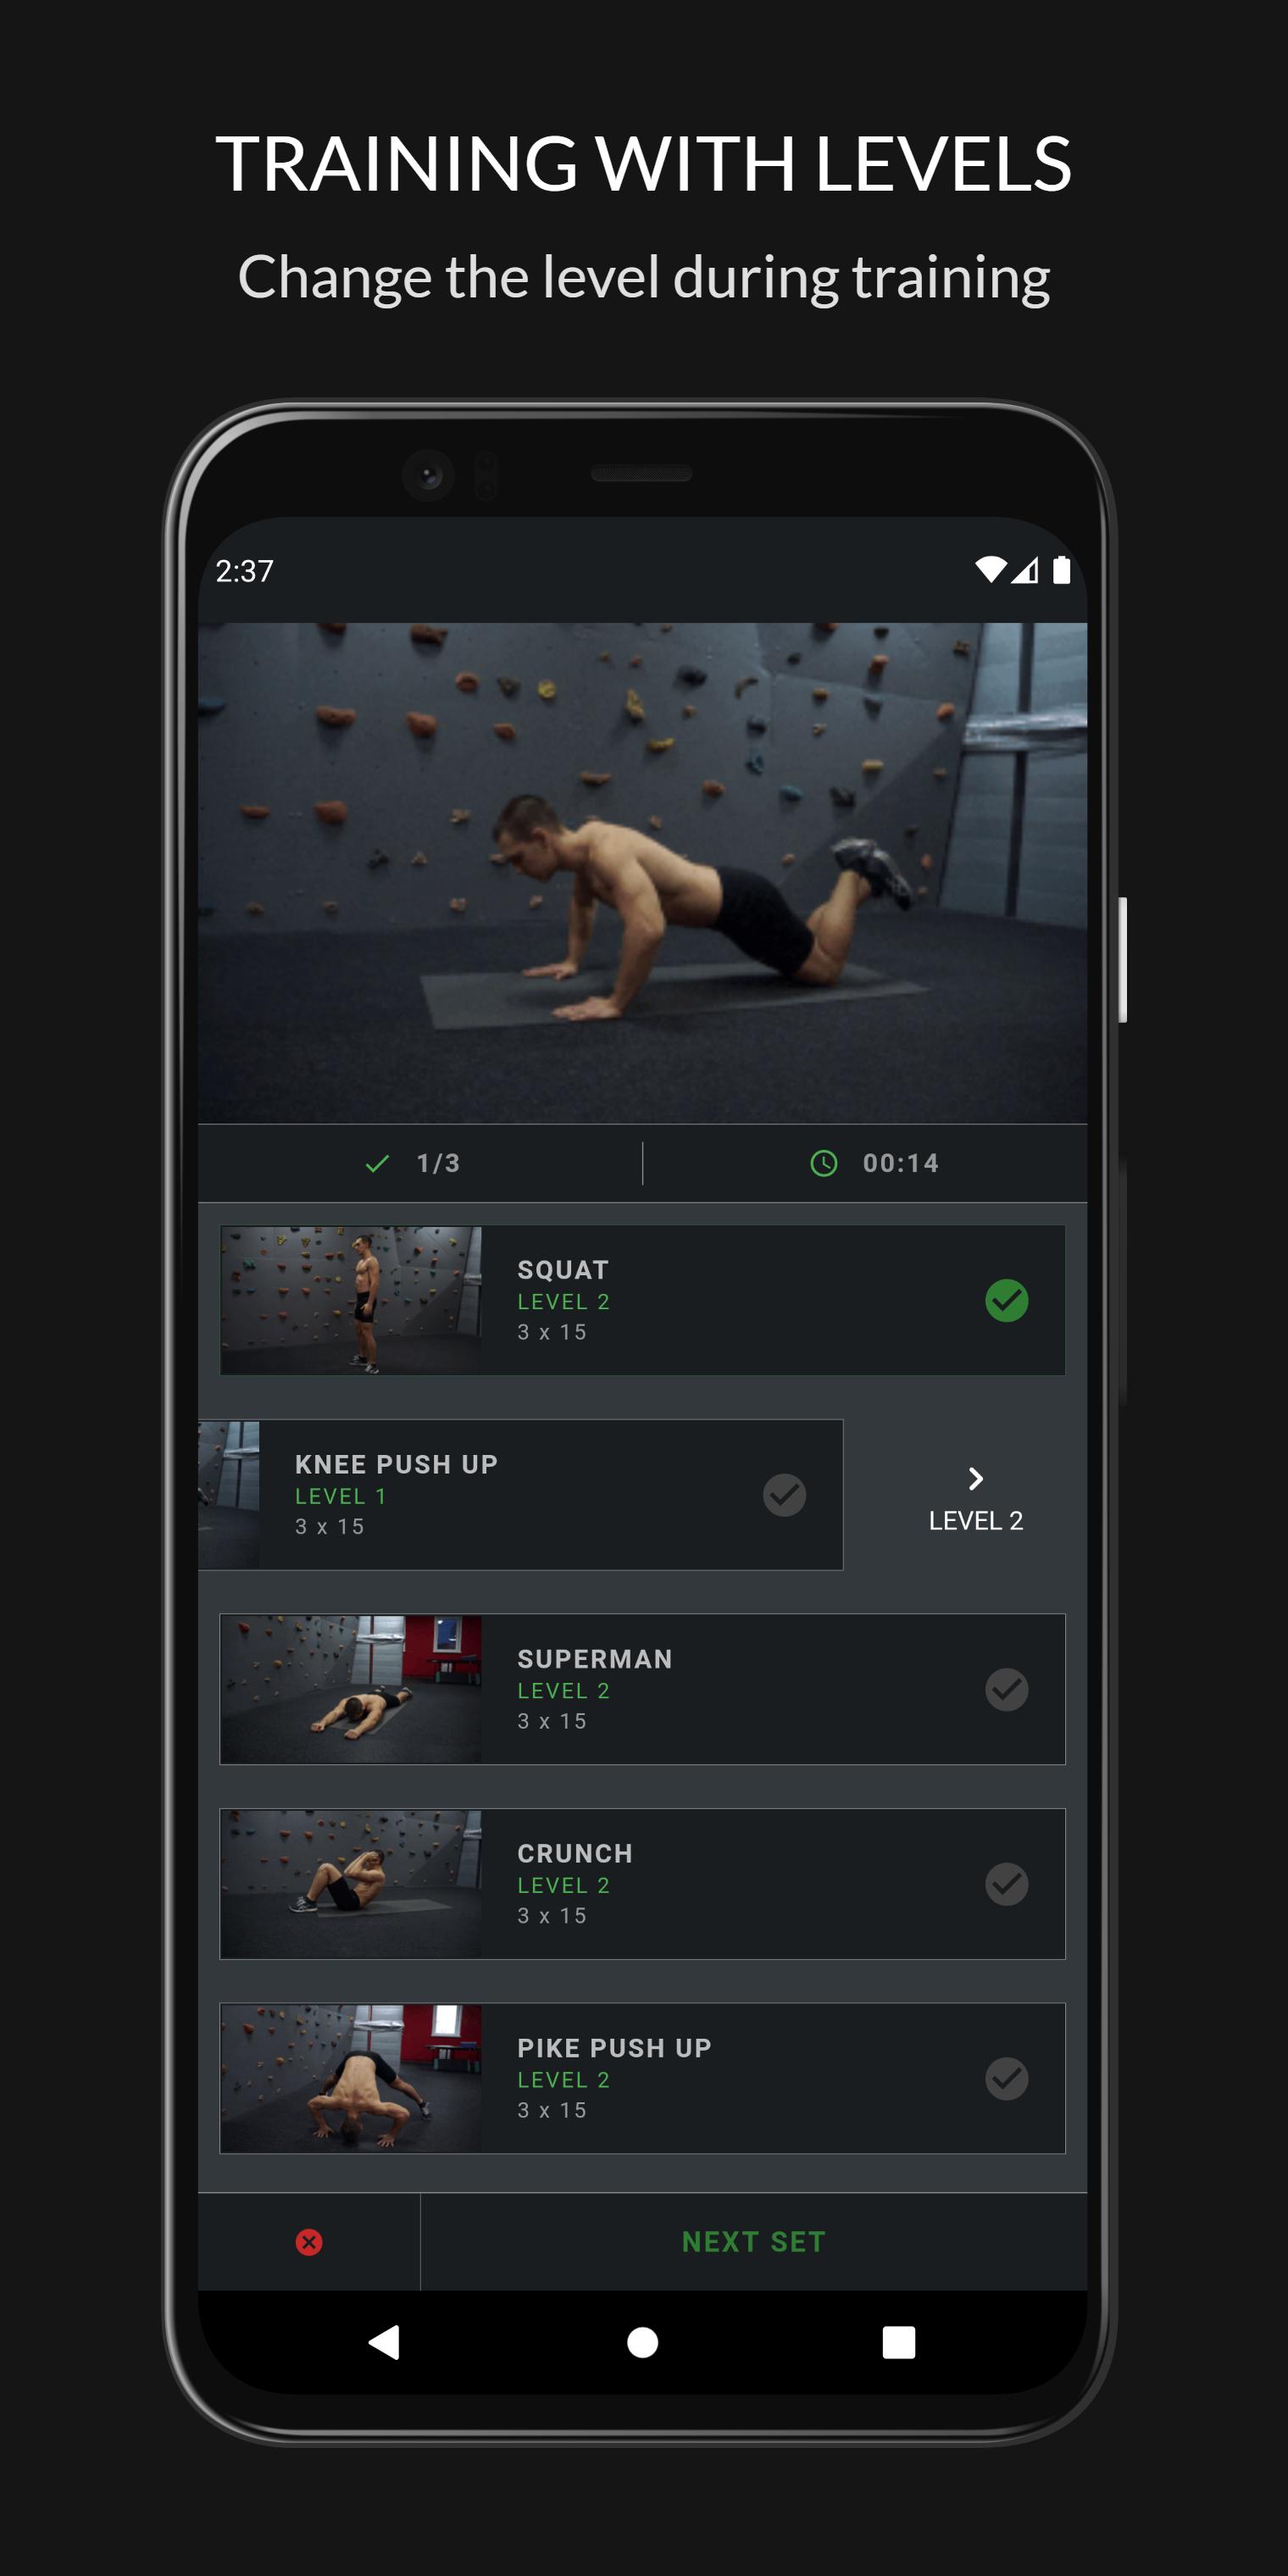 All in One Fitness - Weight Loss, Workouts & More 1.2.2 Screenshot 1